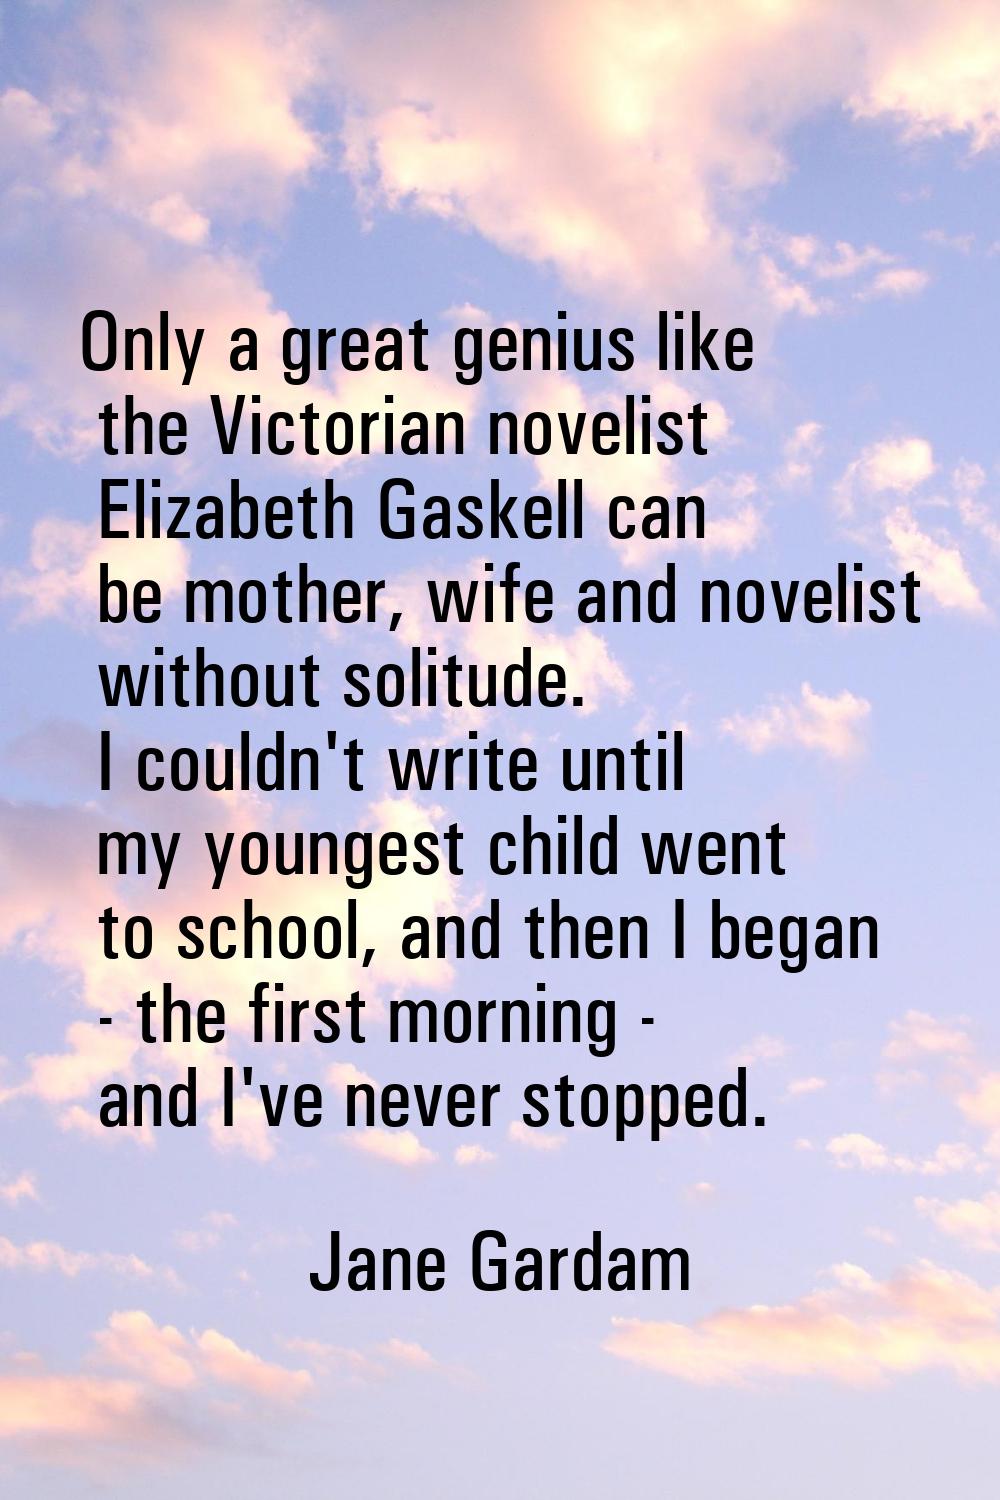 Only a great genius like the Victorian novelist Elizabeth Gaskell can be mother, wife and novelist 